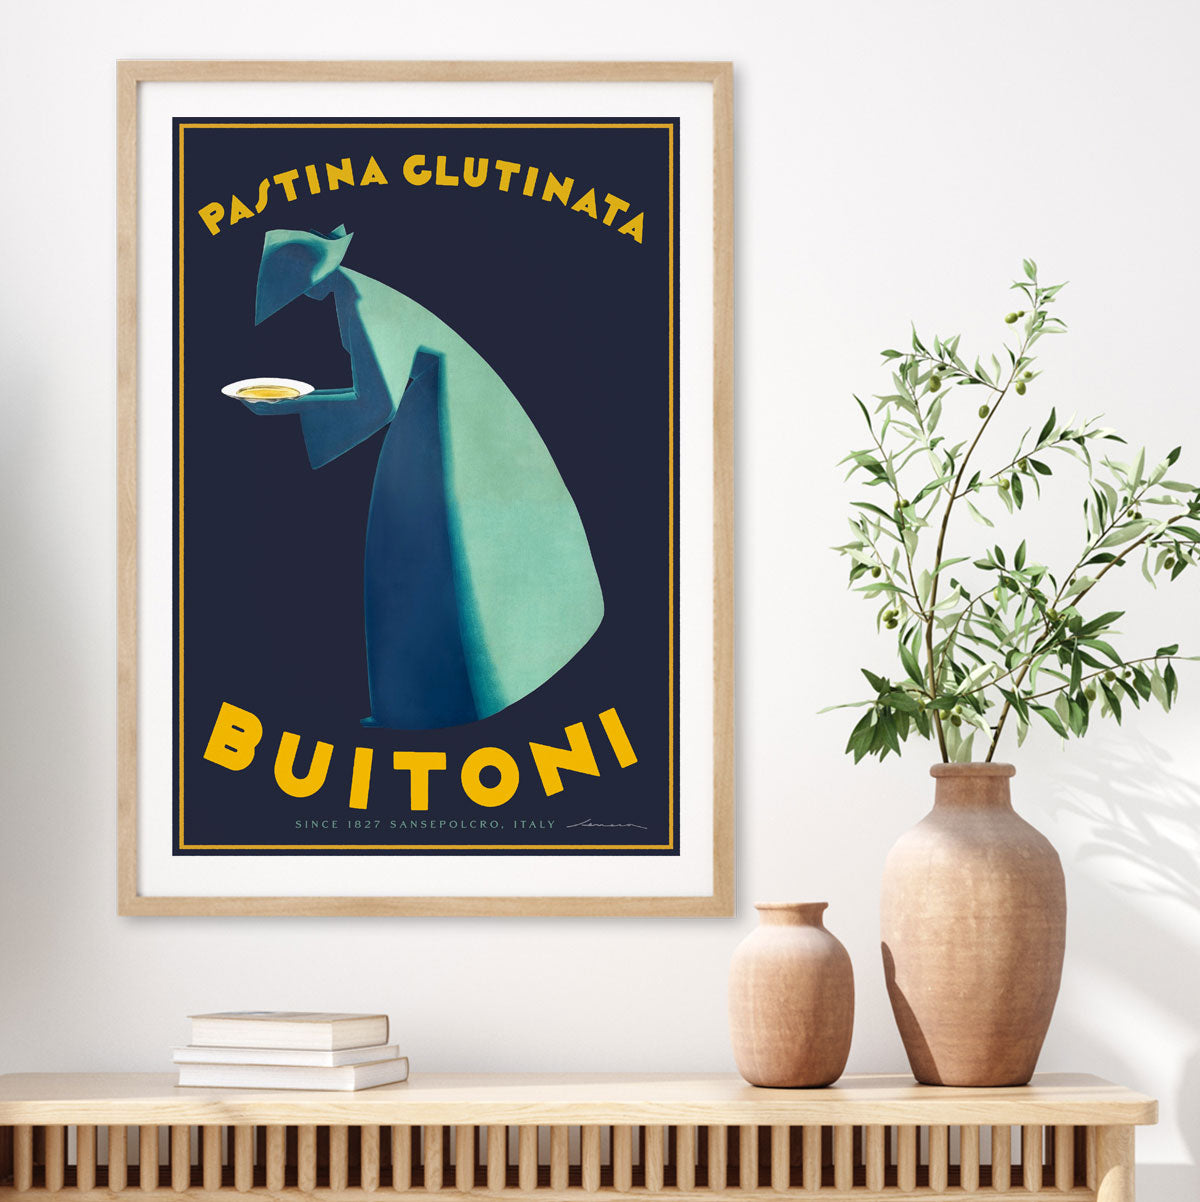 Buitoni Pasta Italy retro vintage poster from Places We Luv